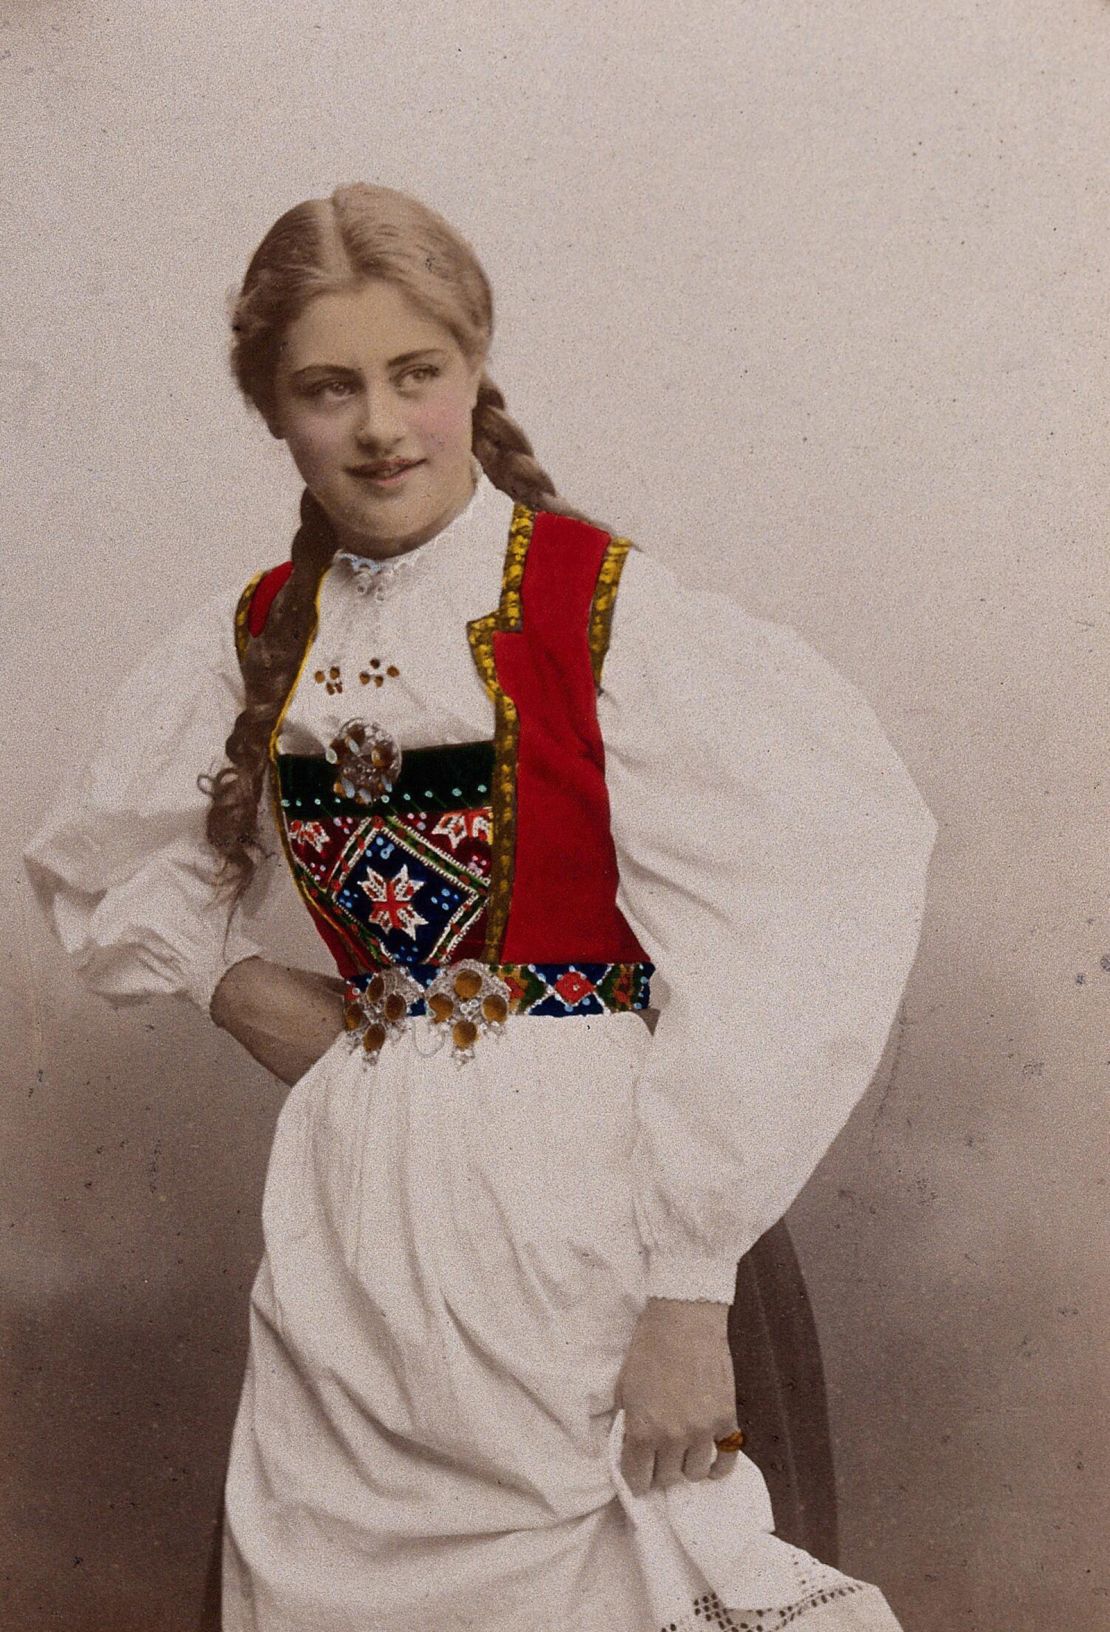 A young Norwegian woman wearing a folk dress poses in a photographic studio in 1901. Traditional Norwegian embroidery might used wool dyed from madder.